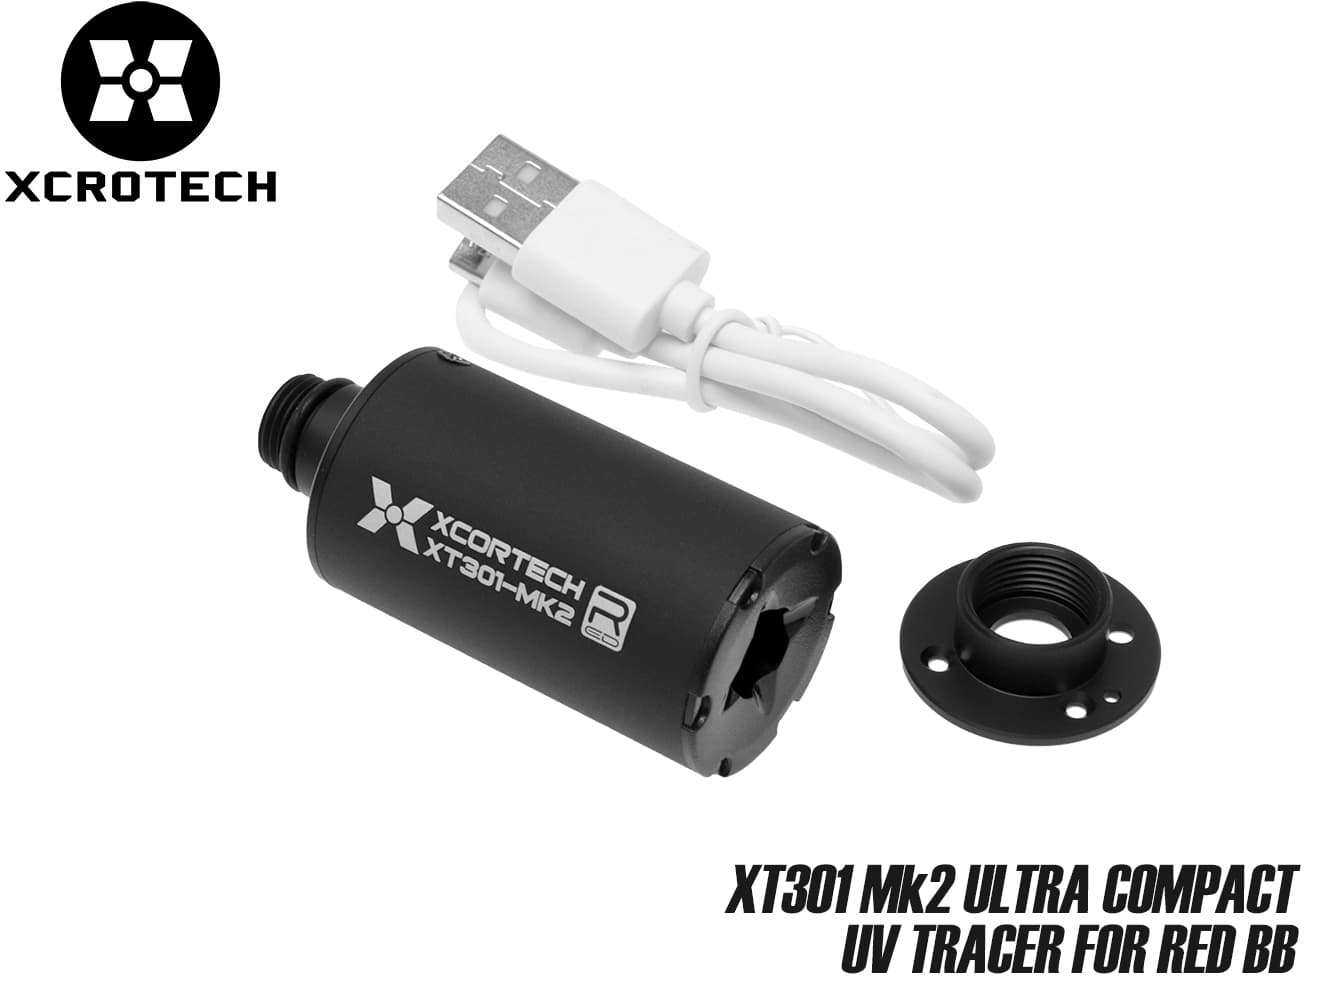 XCORTECH XT301Mk2 ウルトラコンパクト トレーサー for RED BB [商品 